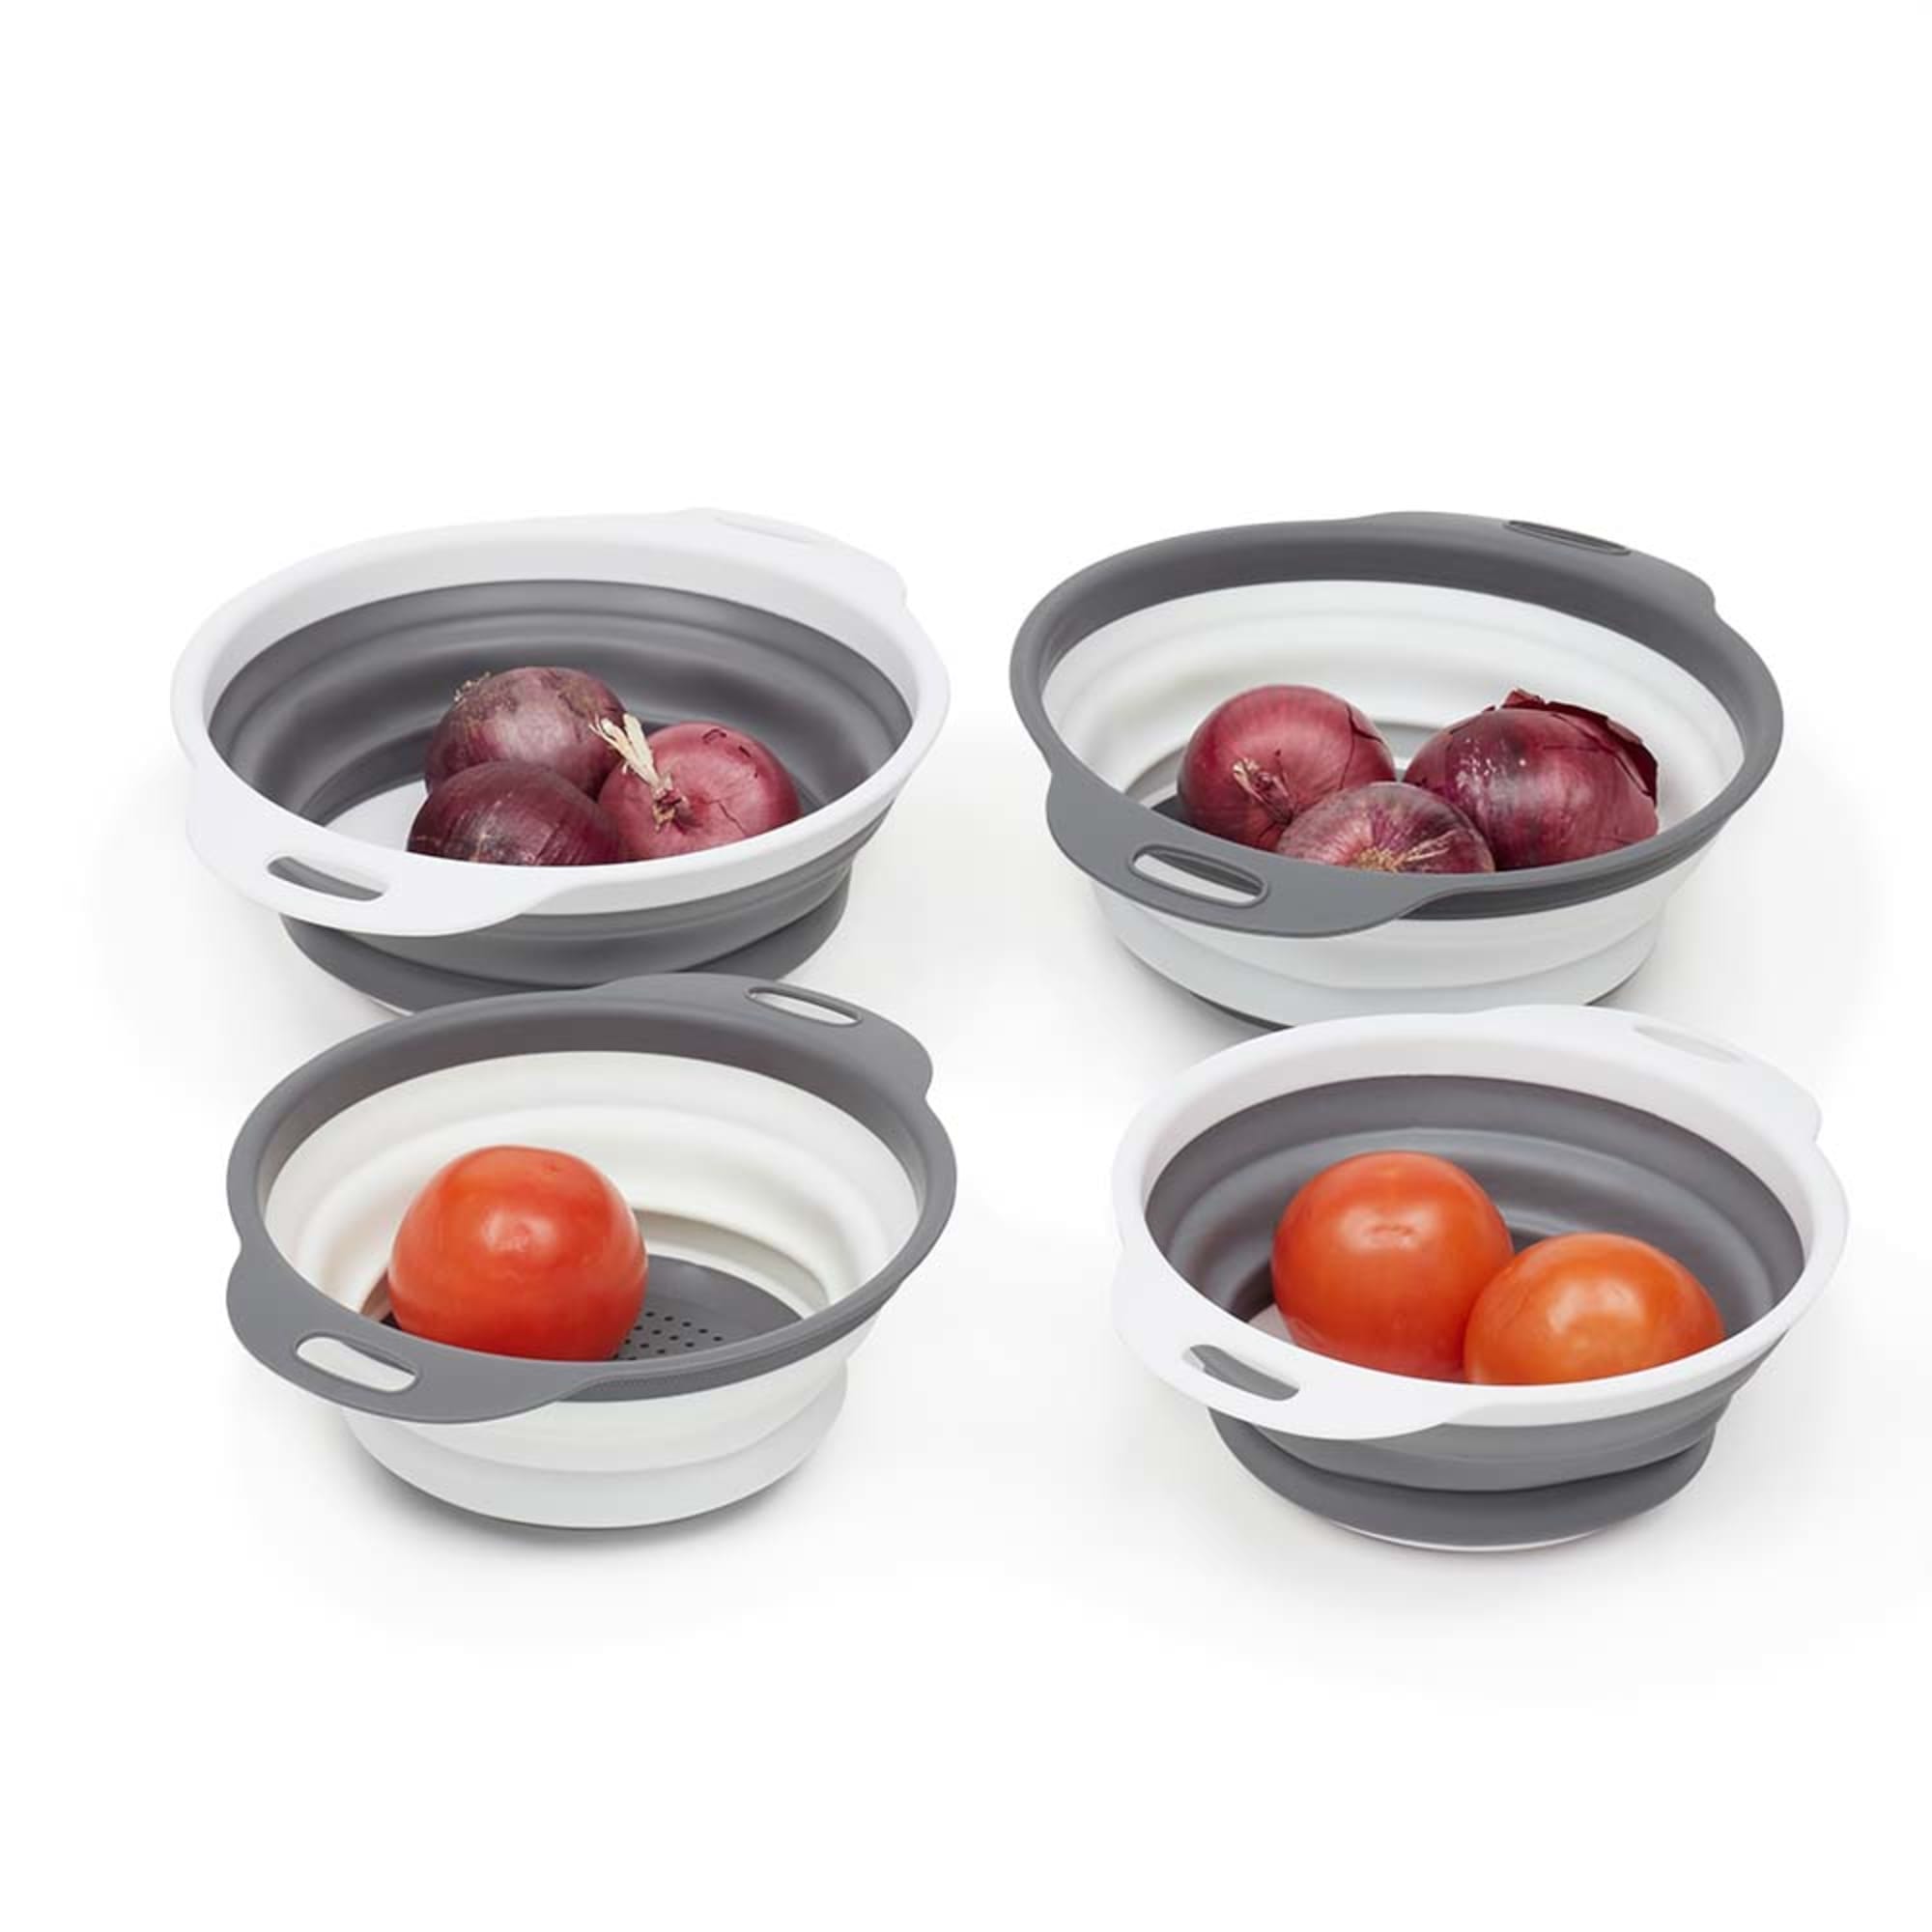 Home Basics 2 Piece Nesting Collapsible Silicone  Colander $5.00 EACH, CASE PACK OF 24